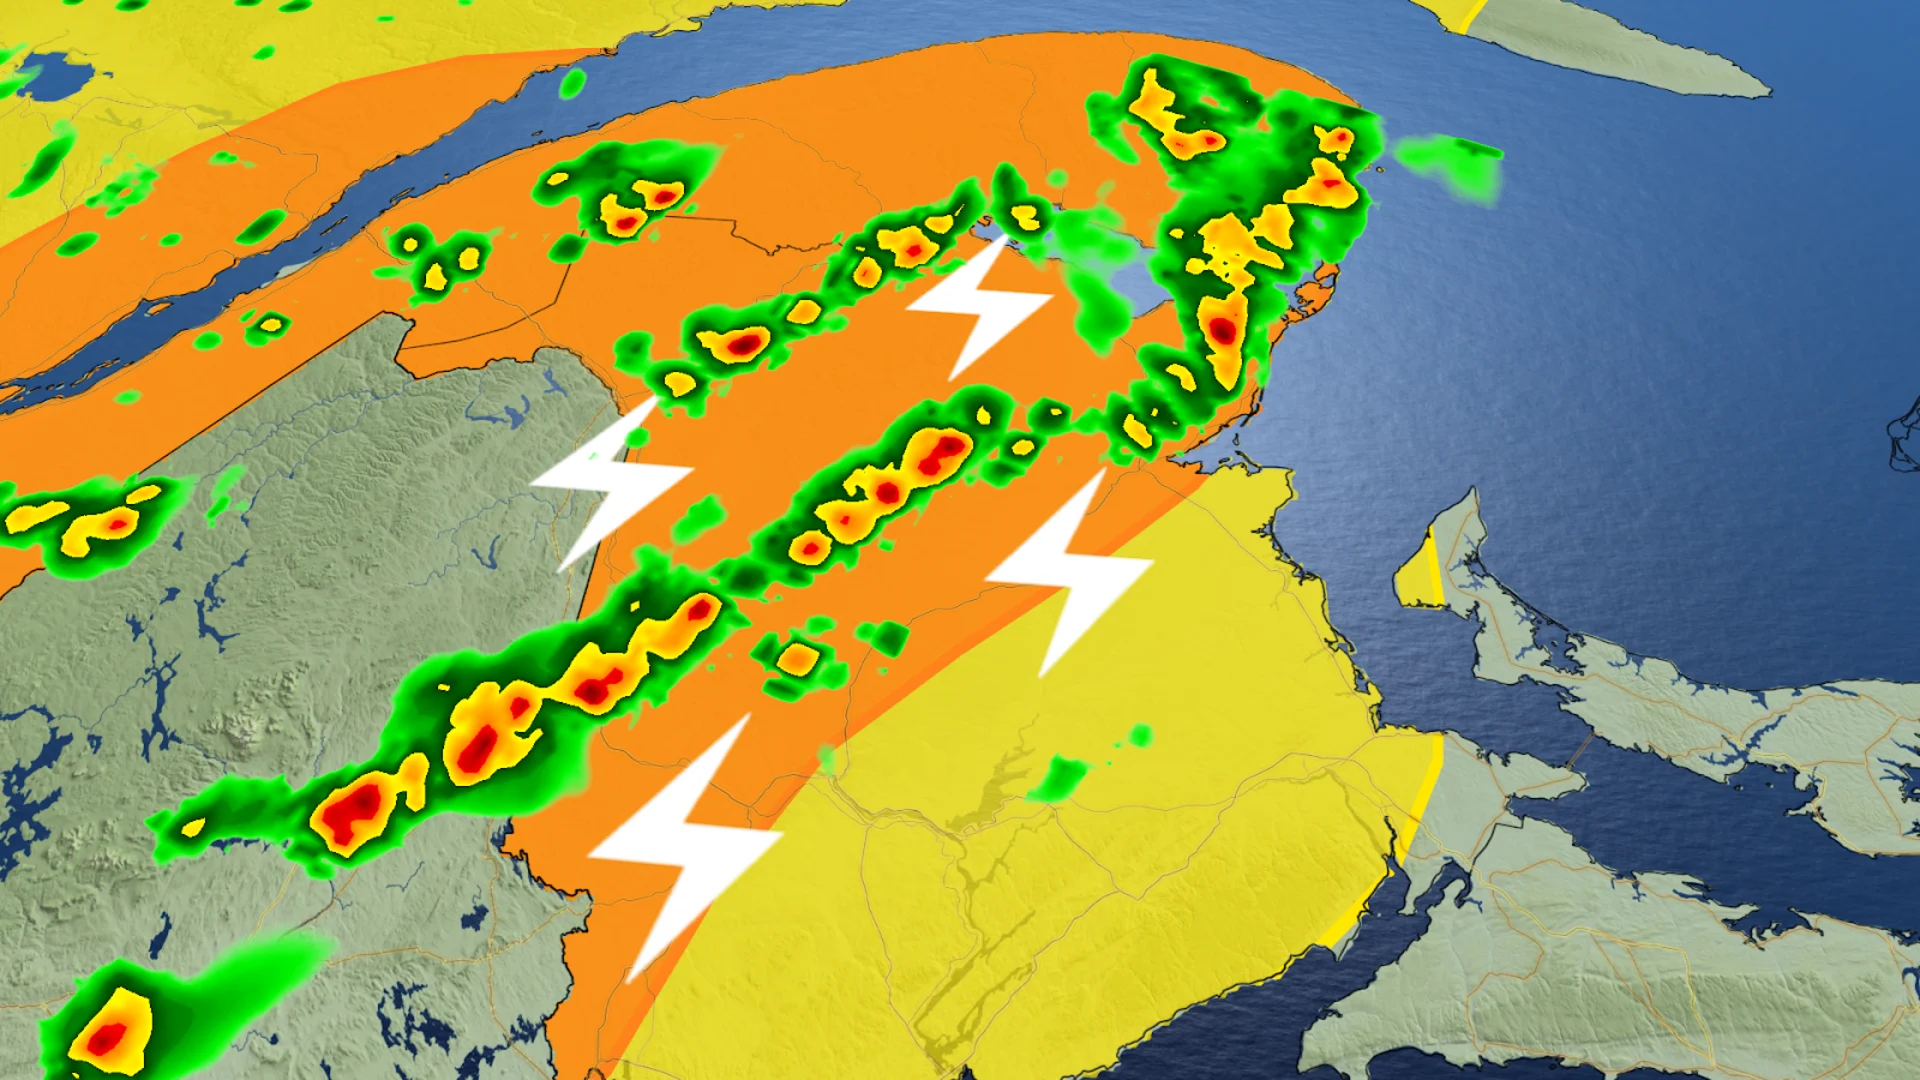 Severe weather threat moves into the Maritimes today, with risk for large hail, strong winds, and even tornadoes. Timing, here